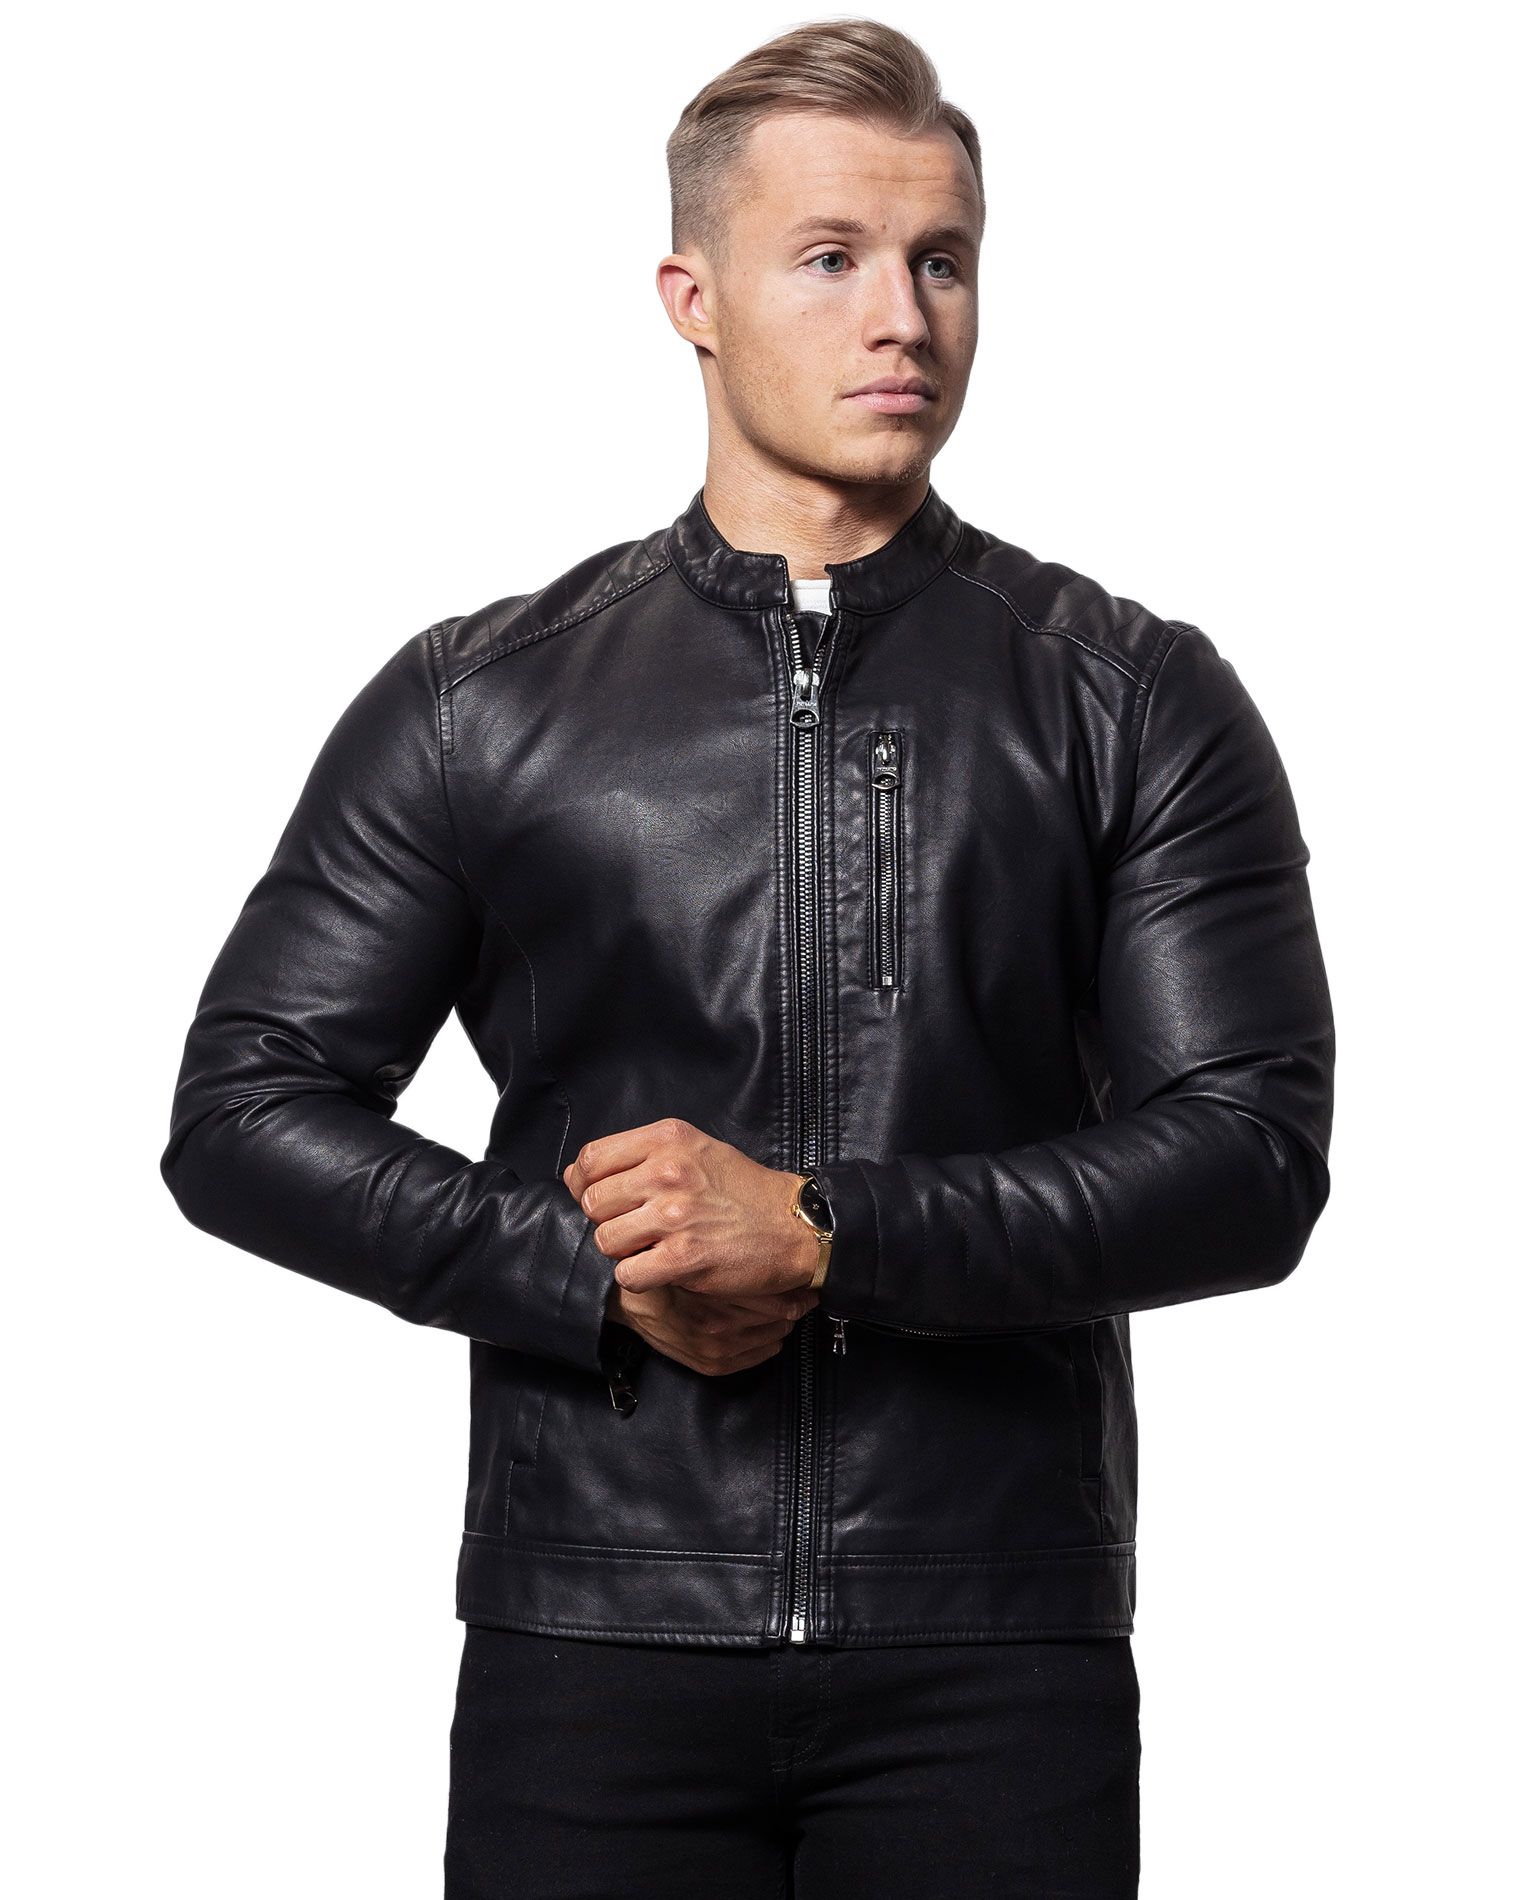 Kyle Faux Leather Jacket Only & Sons - 8728 - Leather Jackets - Jerone